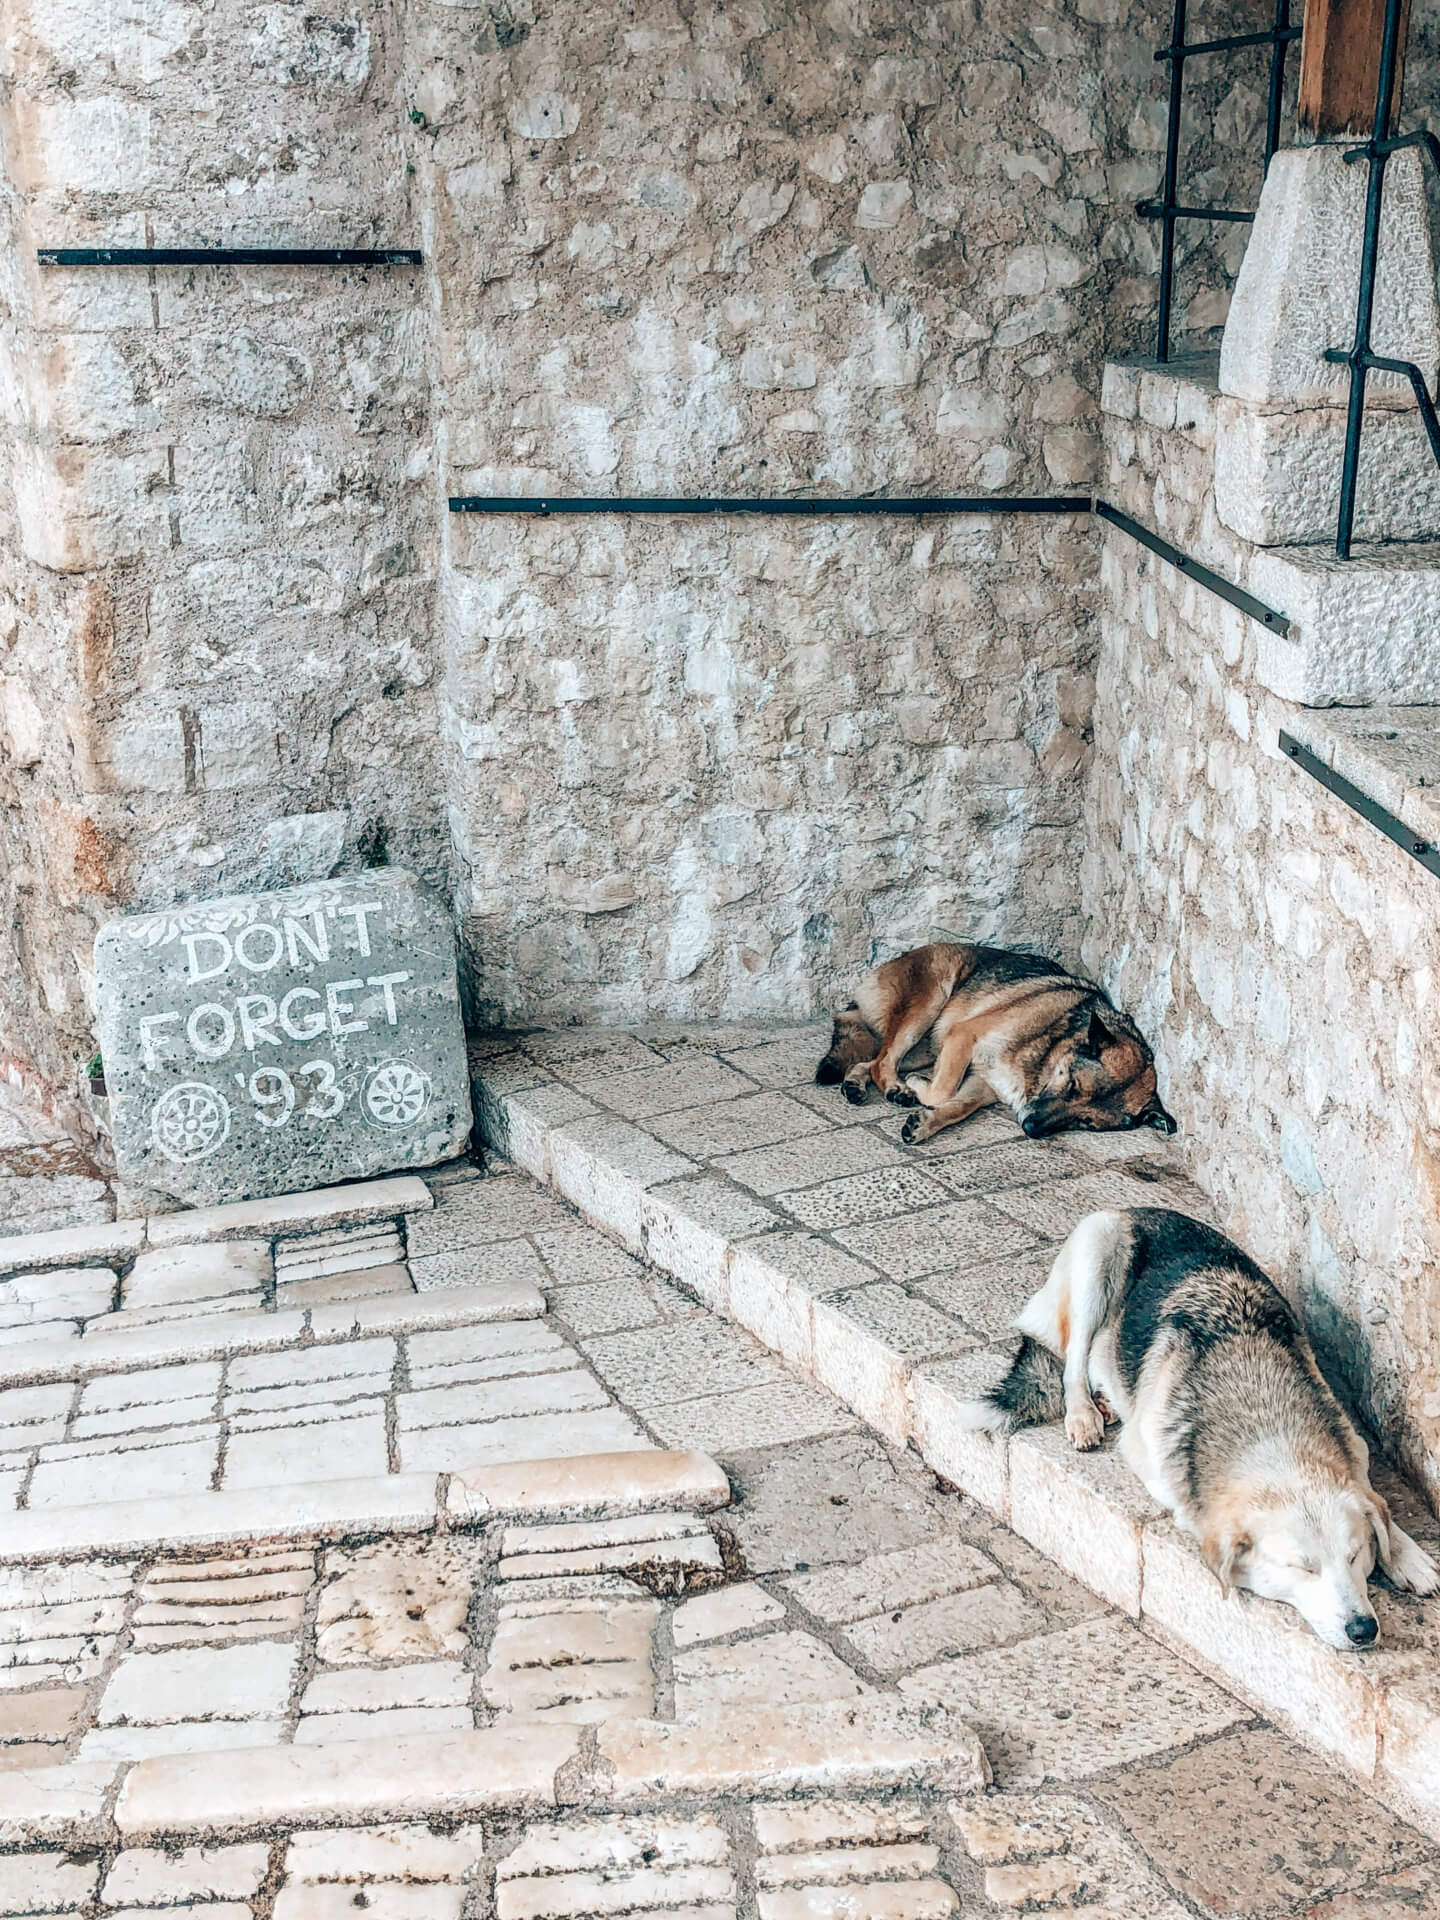 Don't Forget 1993 memorial sign with stray dogs in Mostar